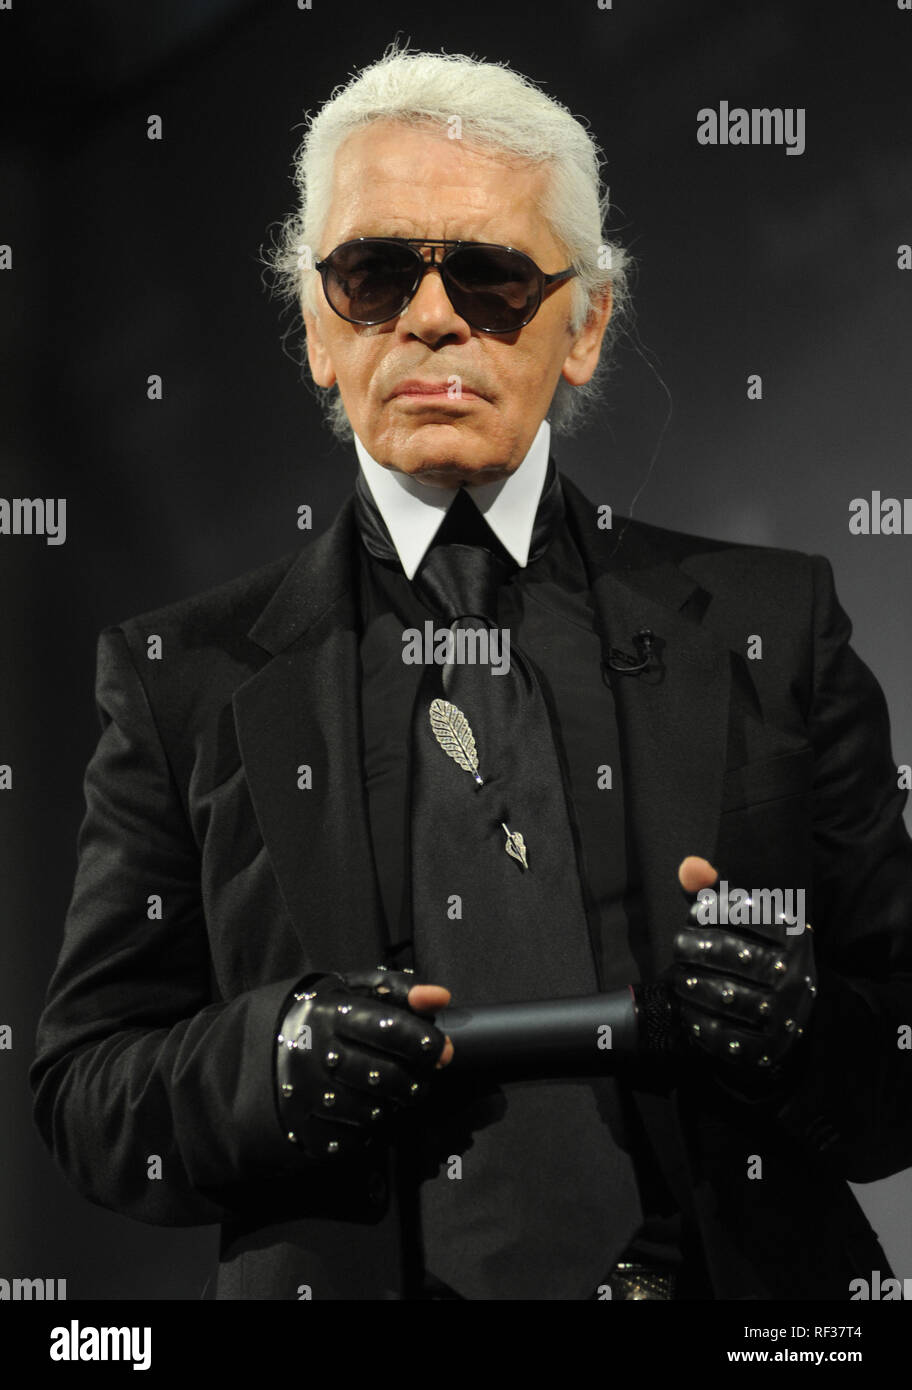 Fashion is about the 'moment': Karl Lagerfeld